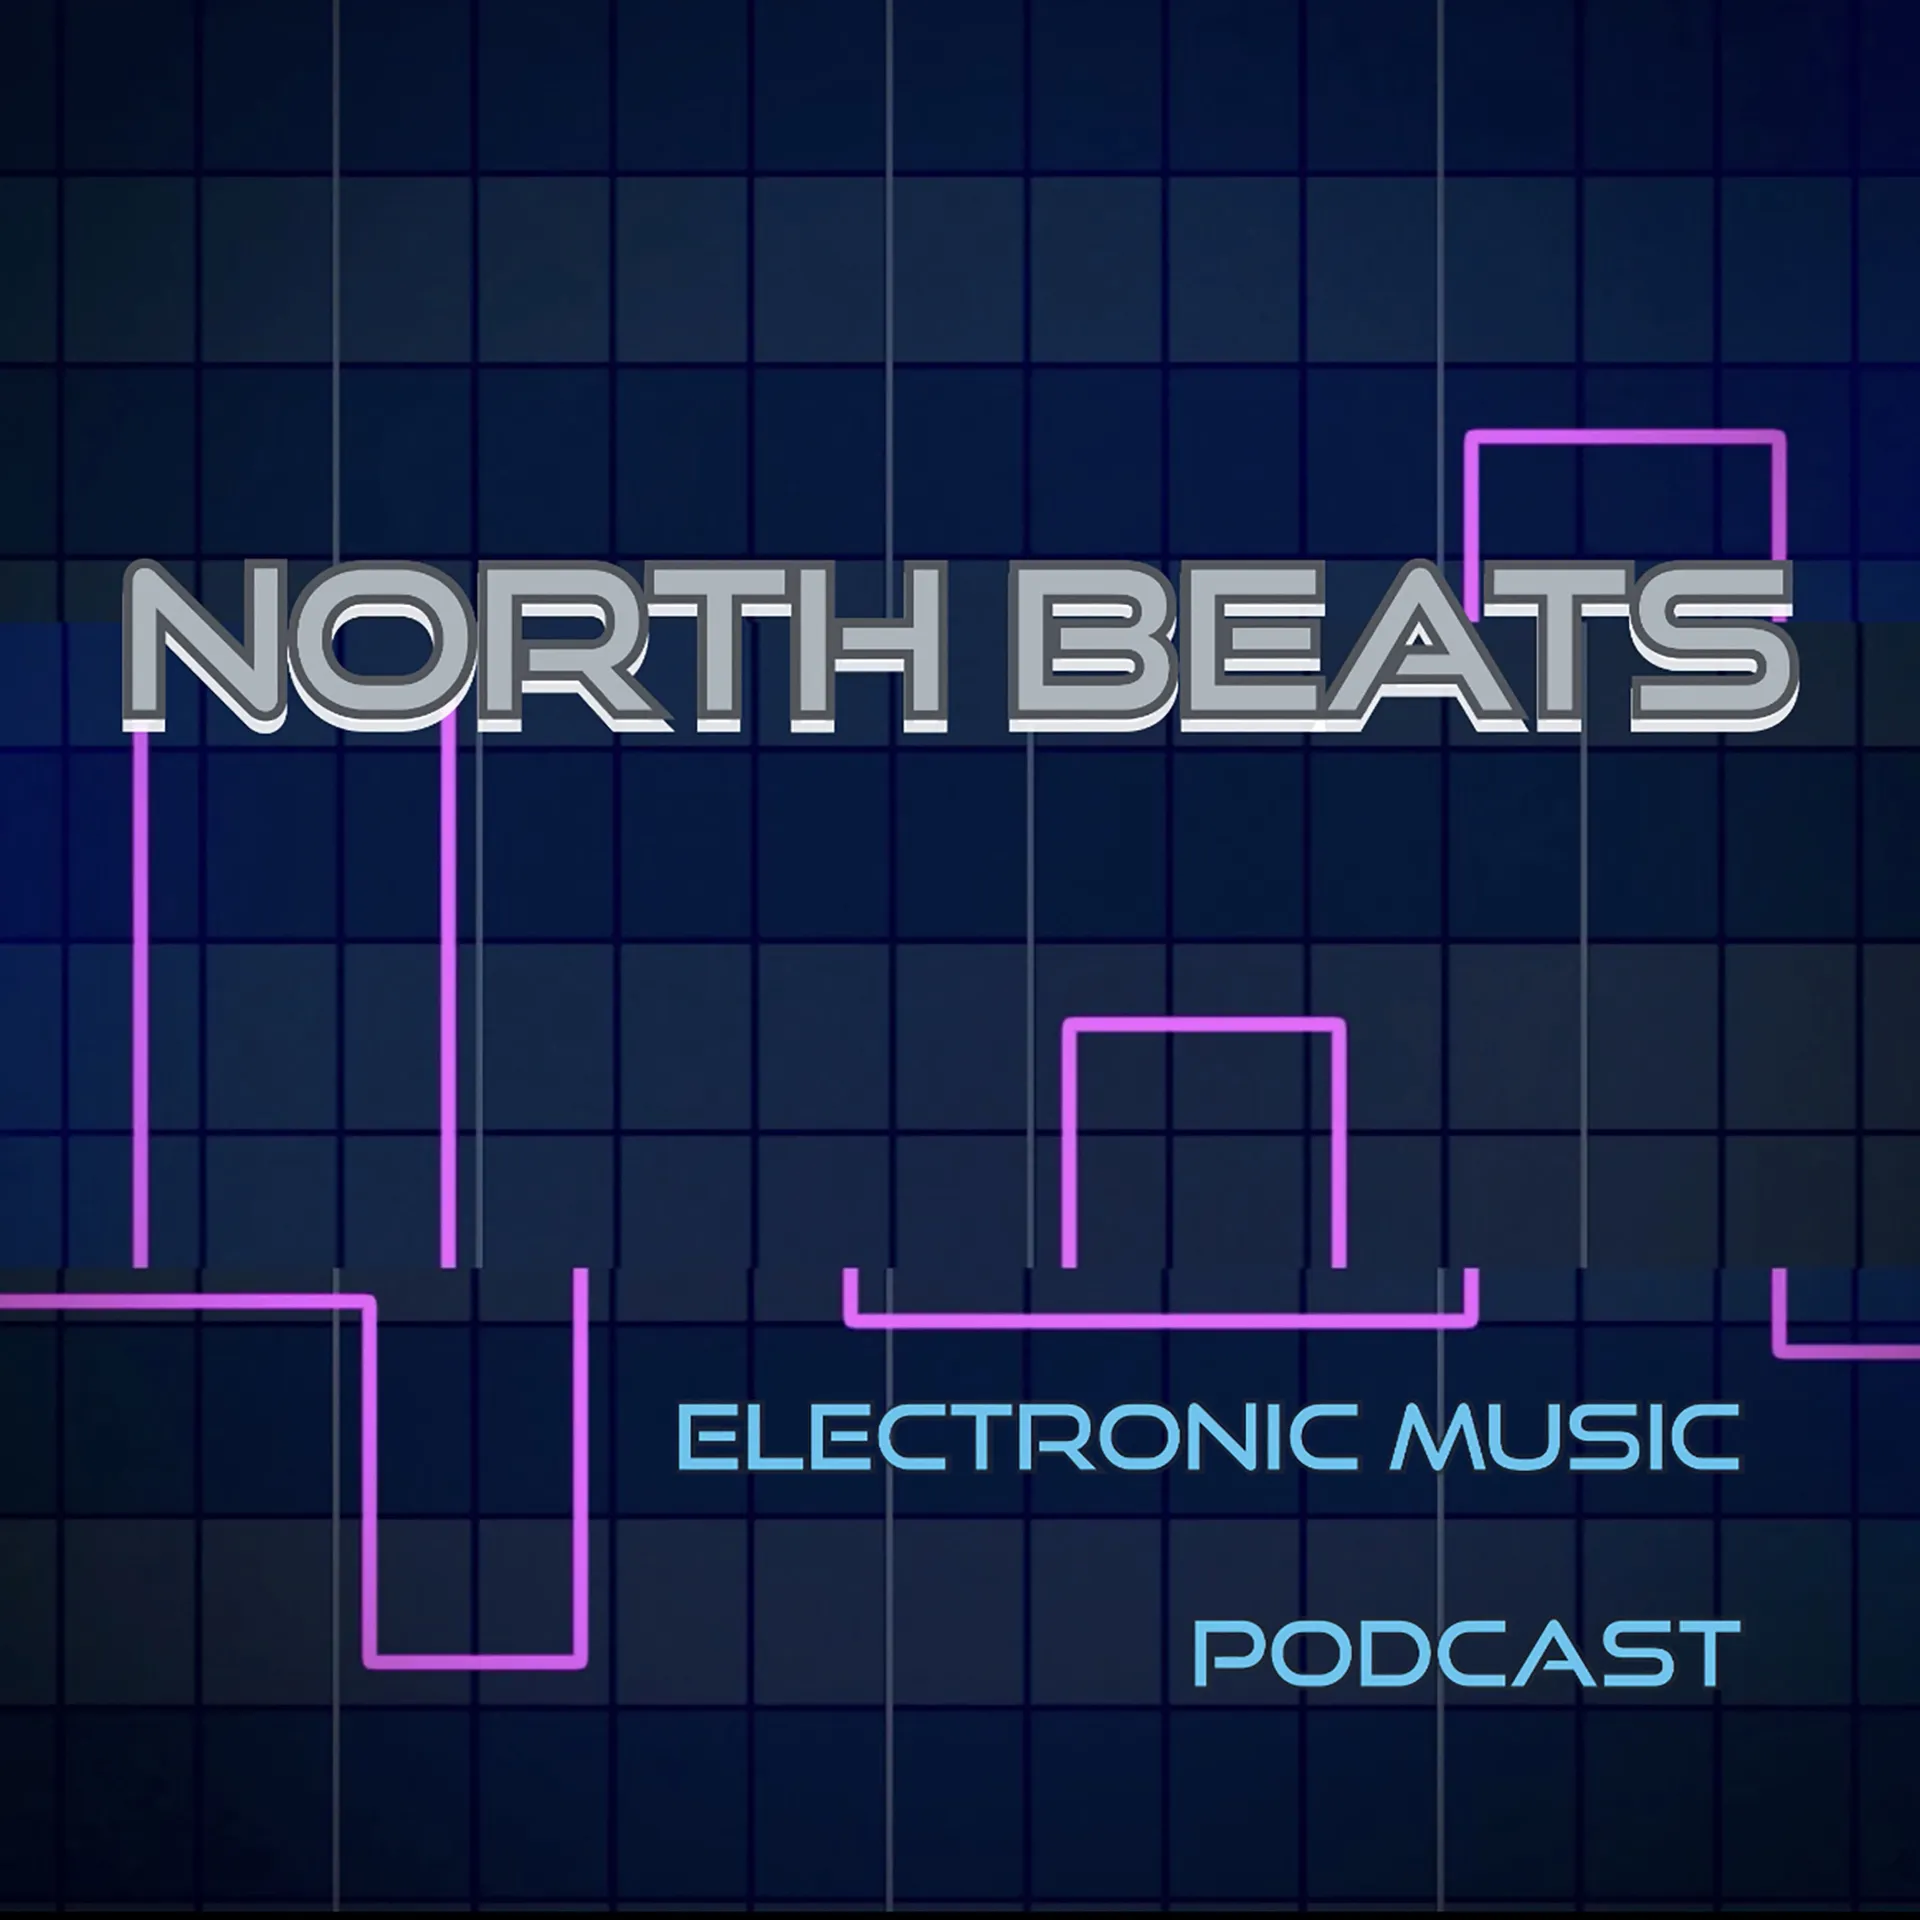 North Beats podcast of Piqued 4 with Mark Lentczner and Lachlan Fletcher